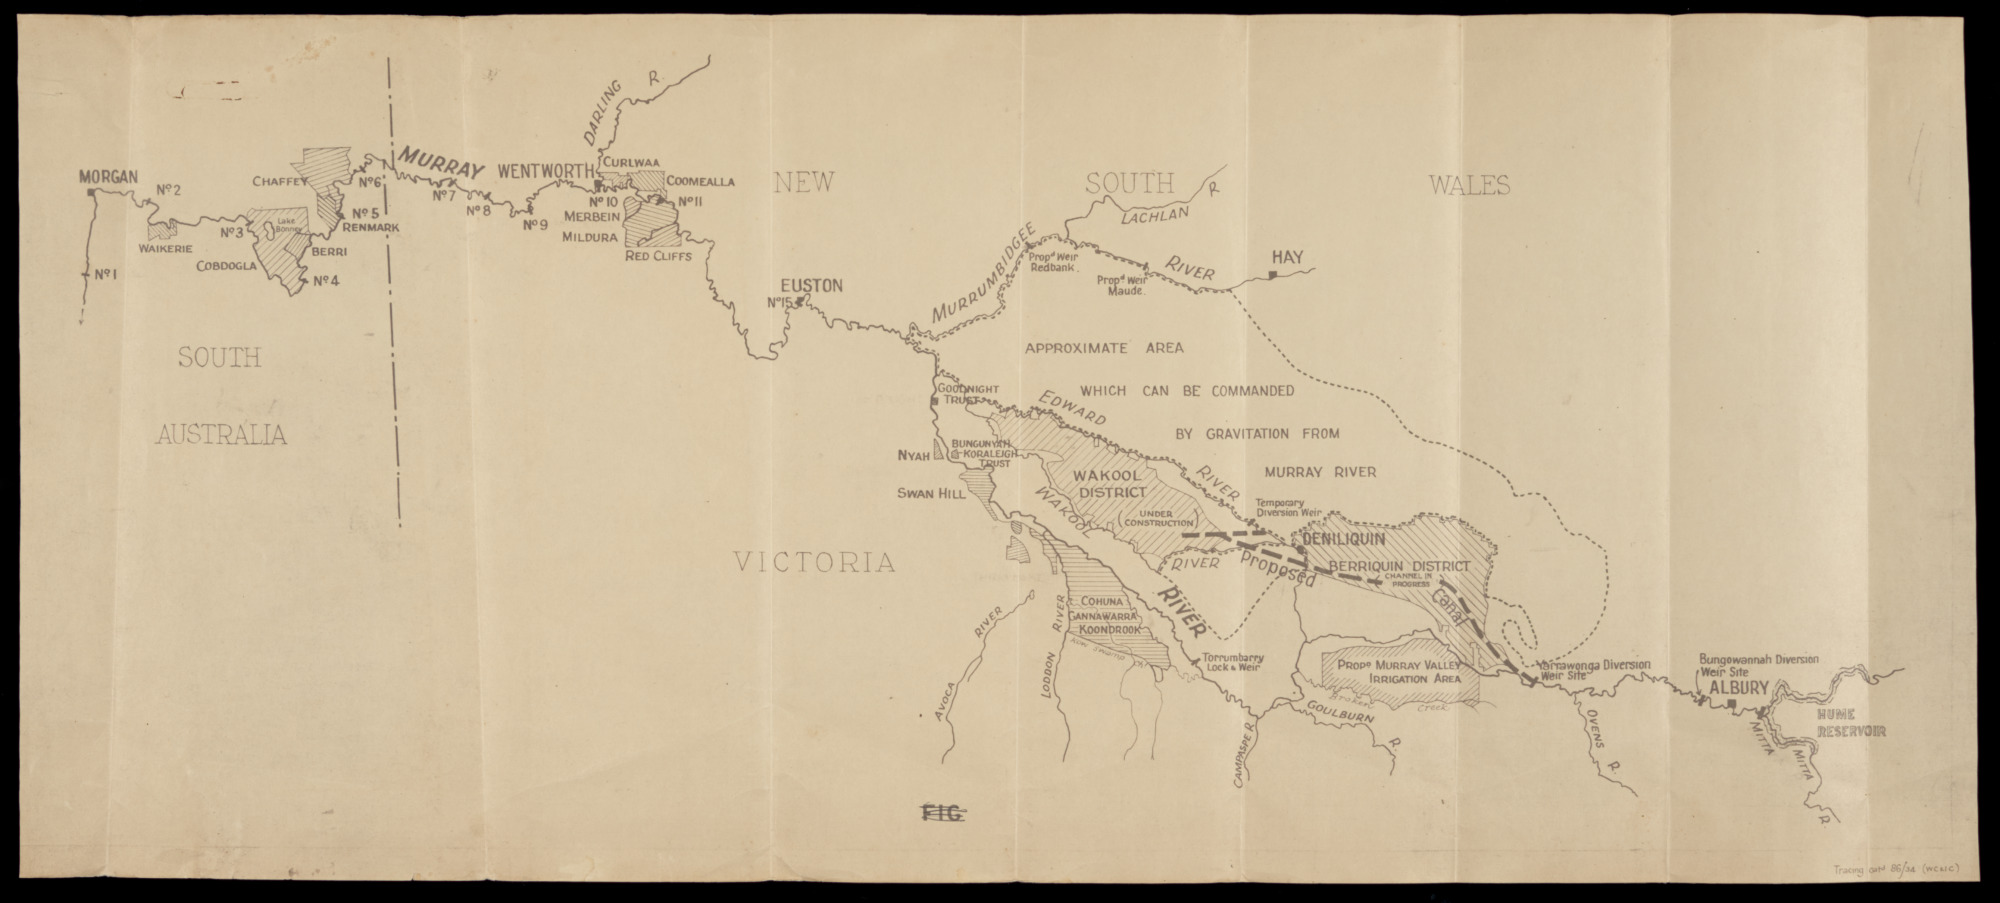 Undated map showing irrigation areas along the Murray River from Morgan, South Australia to Hume Reservoir.